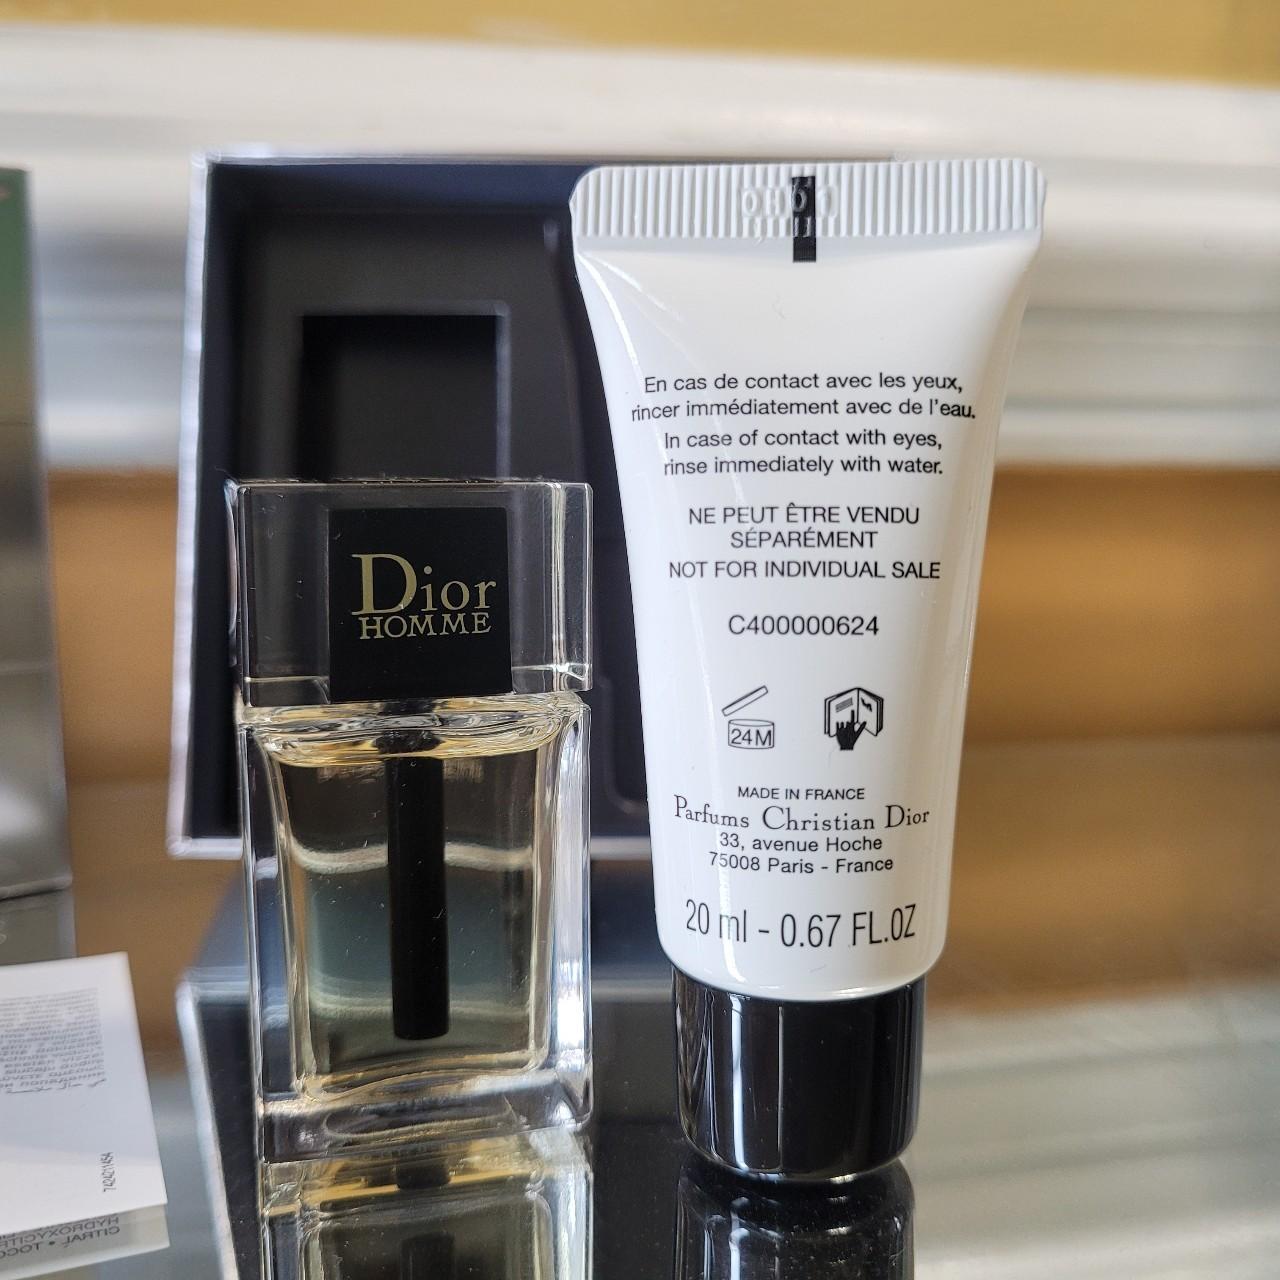 Product Image 3 - Dior homme gift set brand